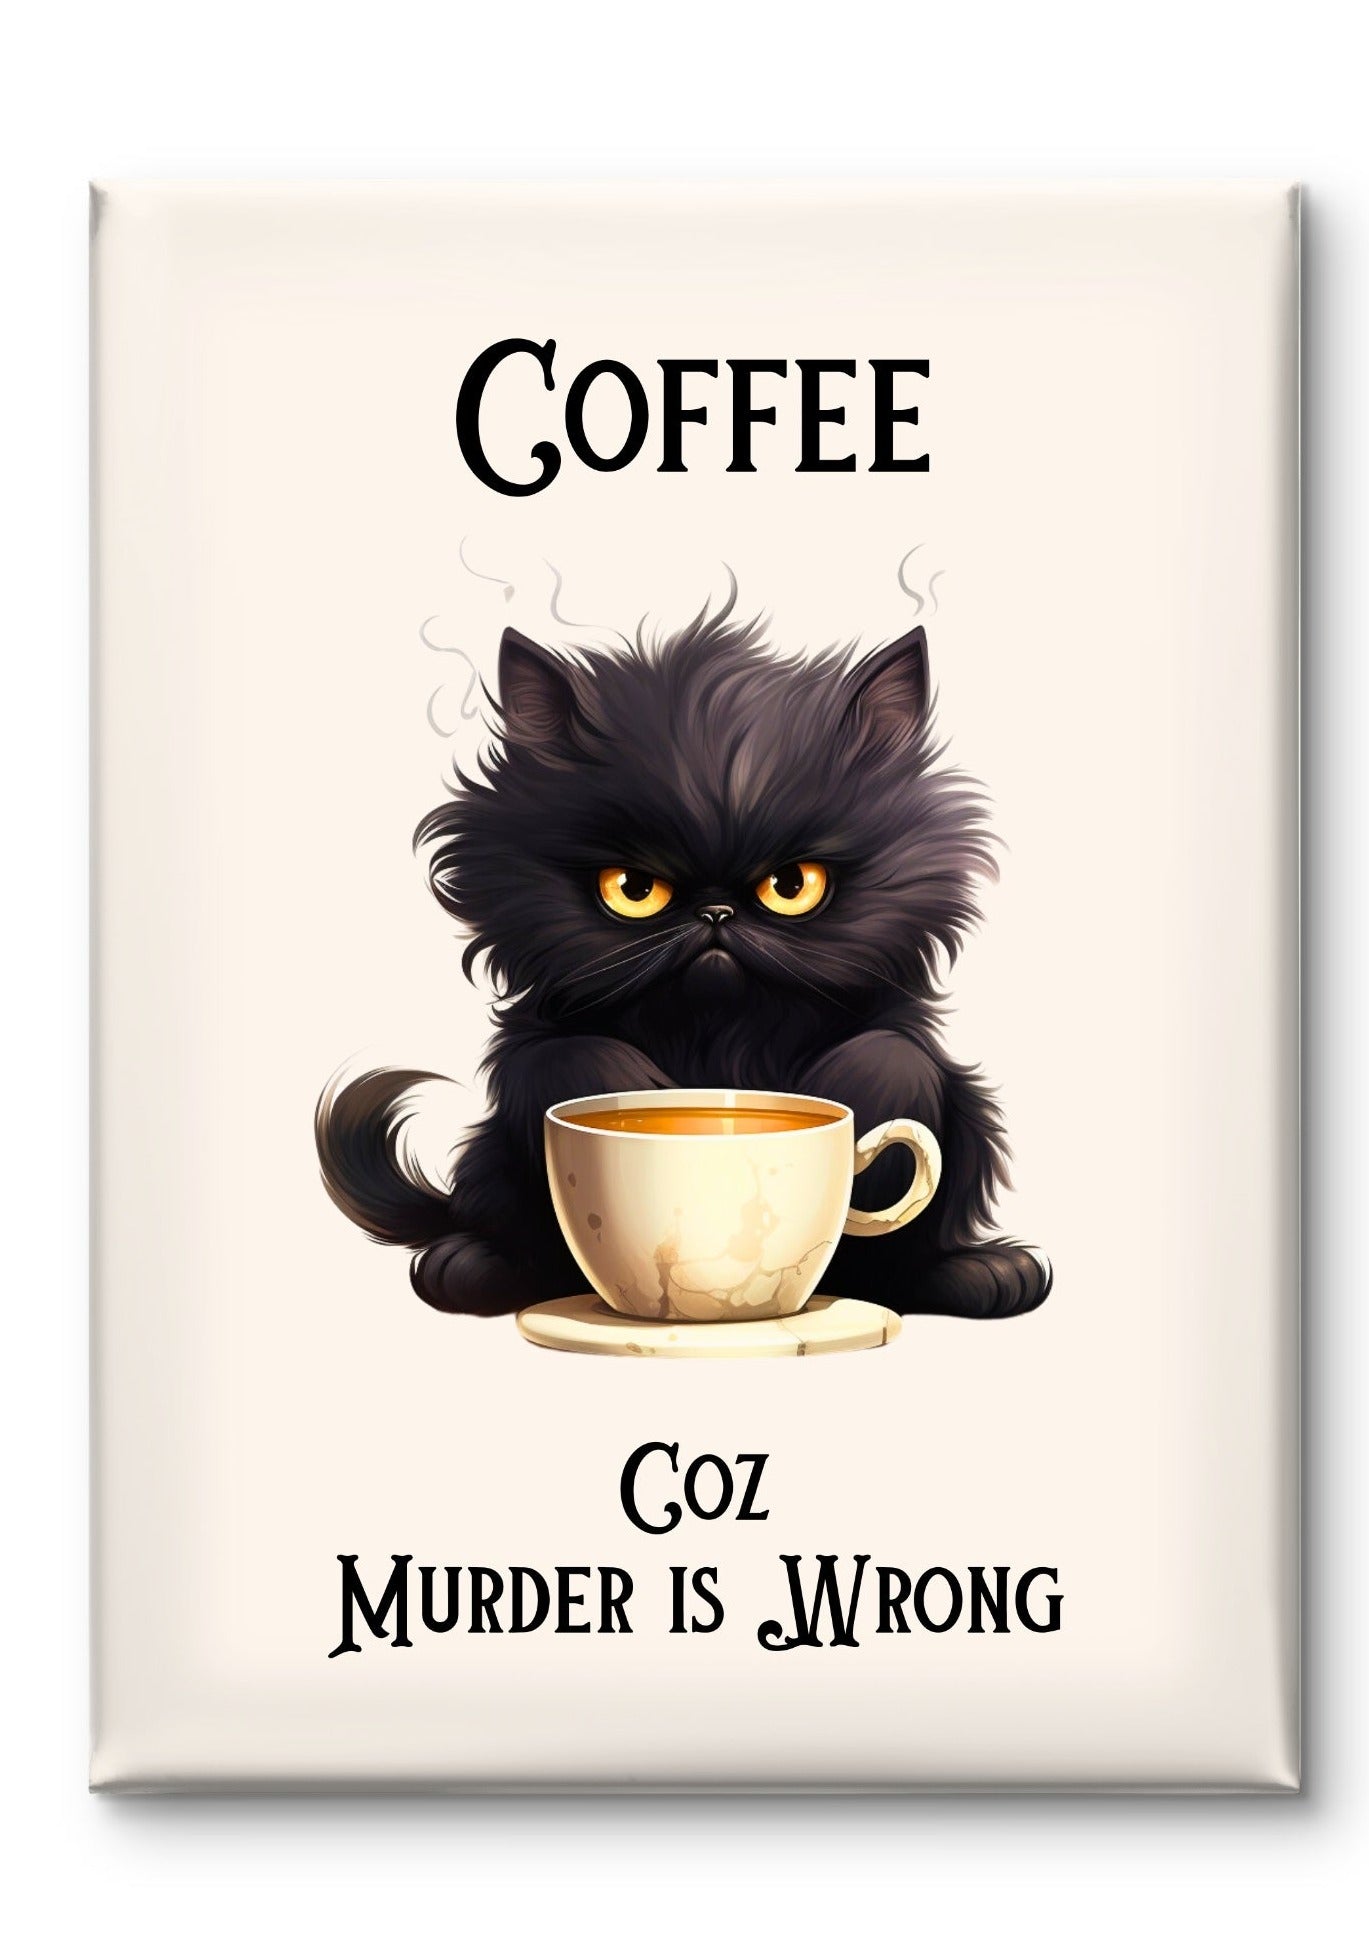 Because Murder Is Wrong by Coffee Couture